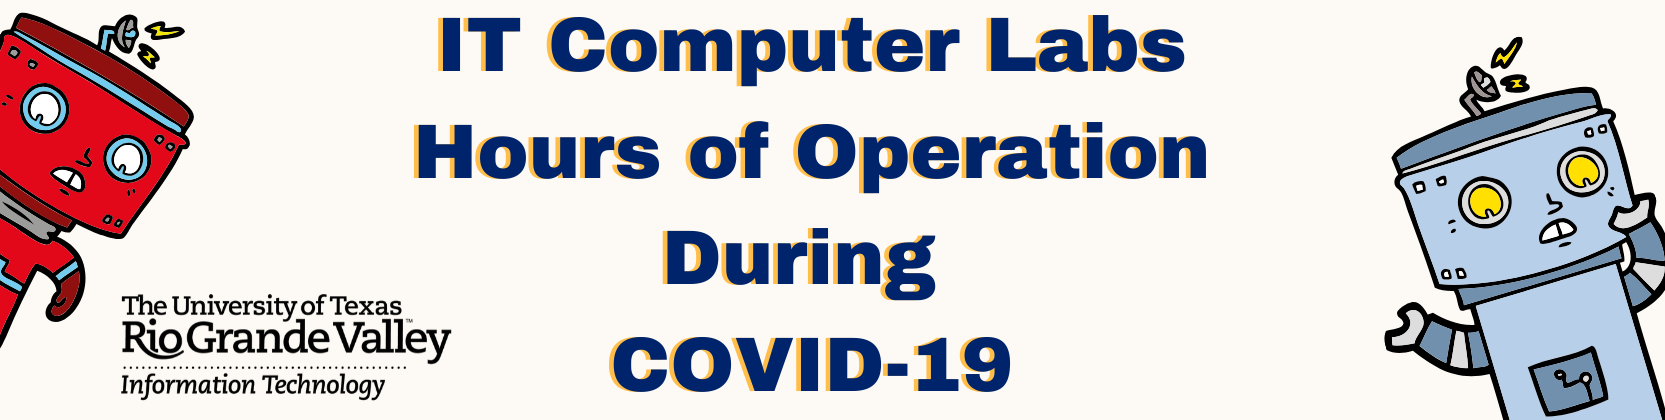 IT Computer Labs Hours of Operation during COVID-19 Page Banner 